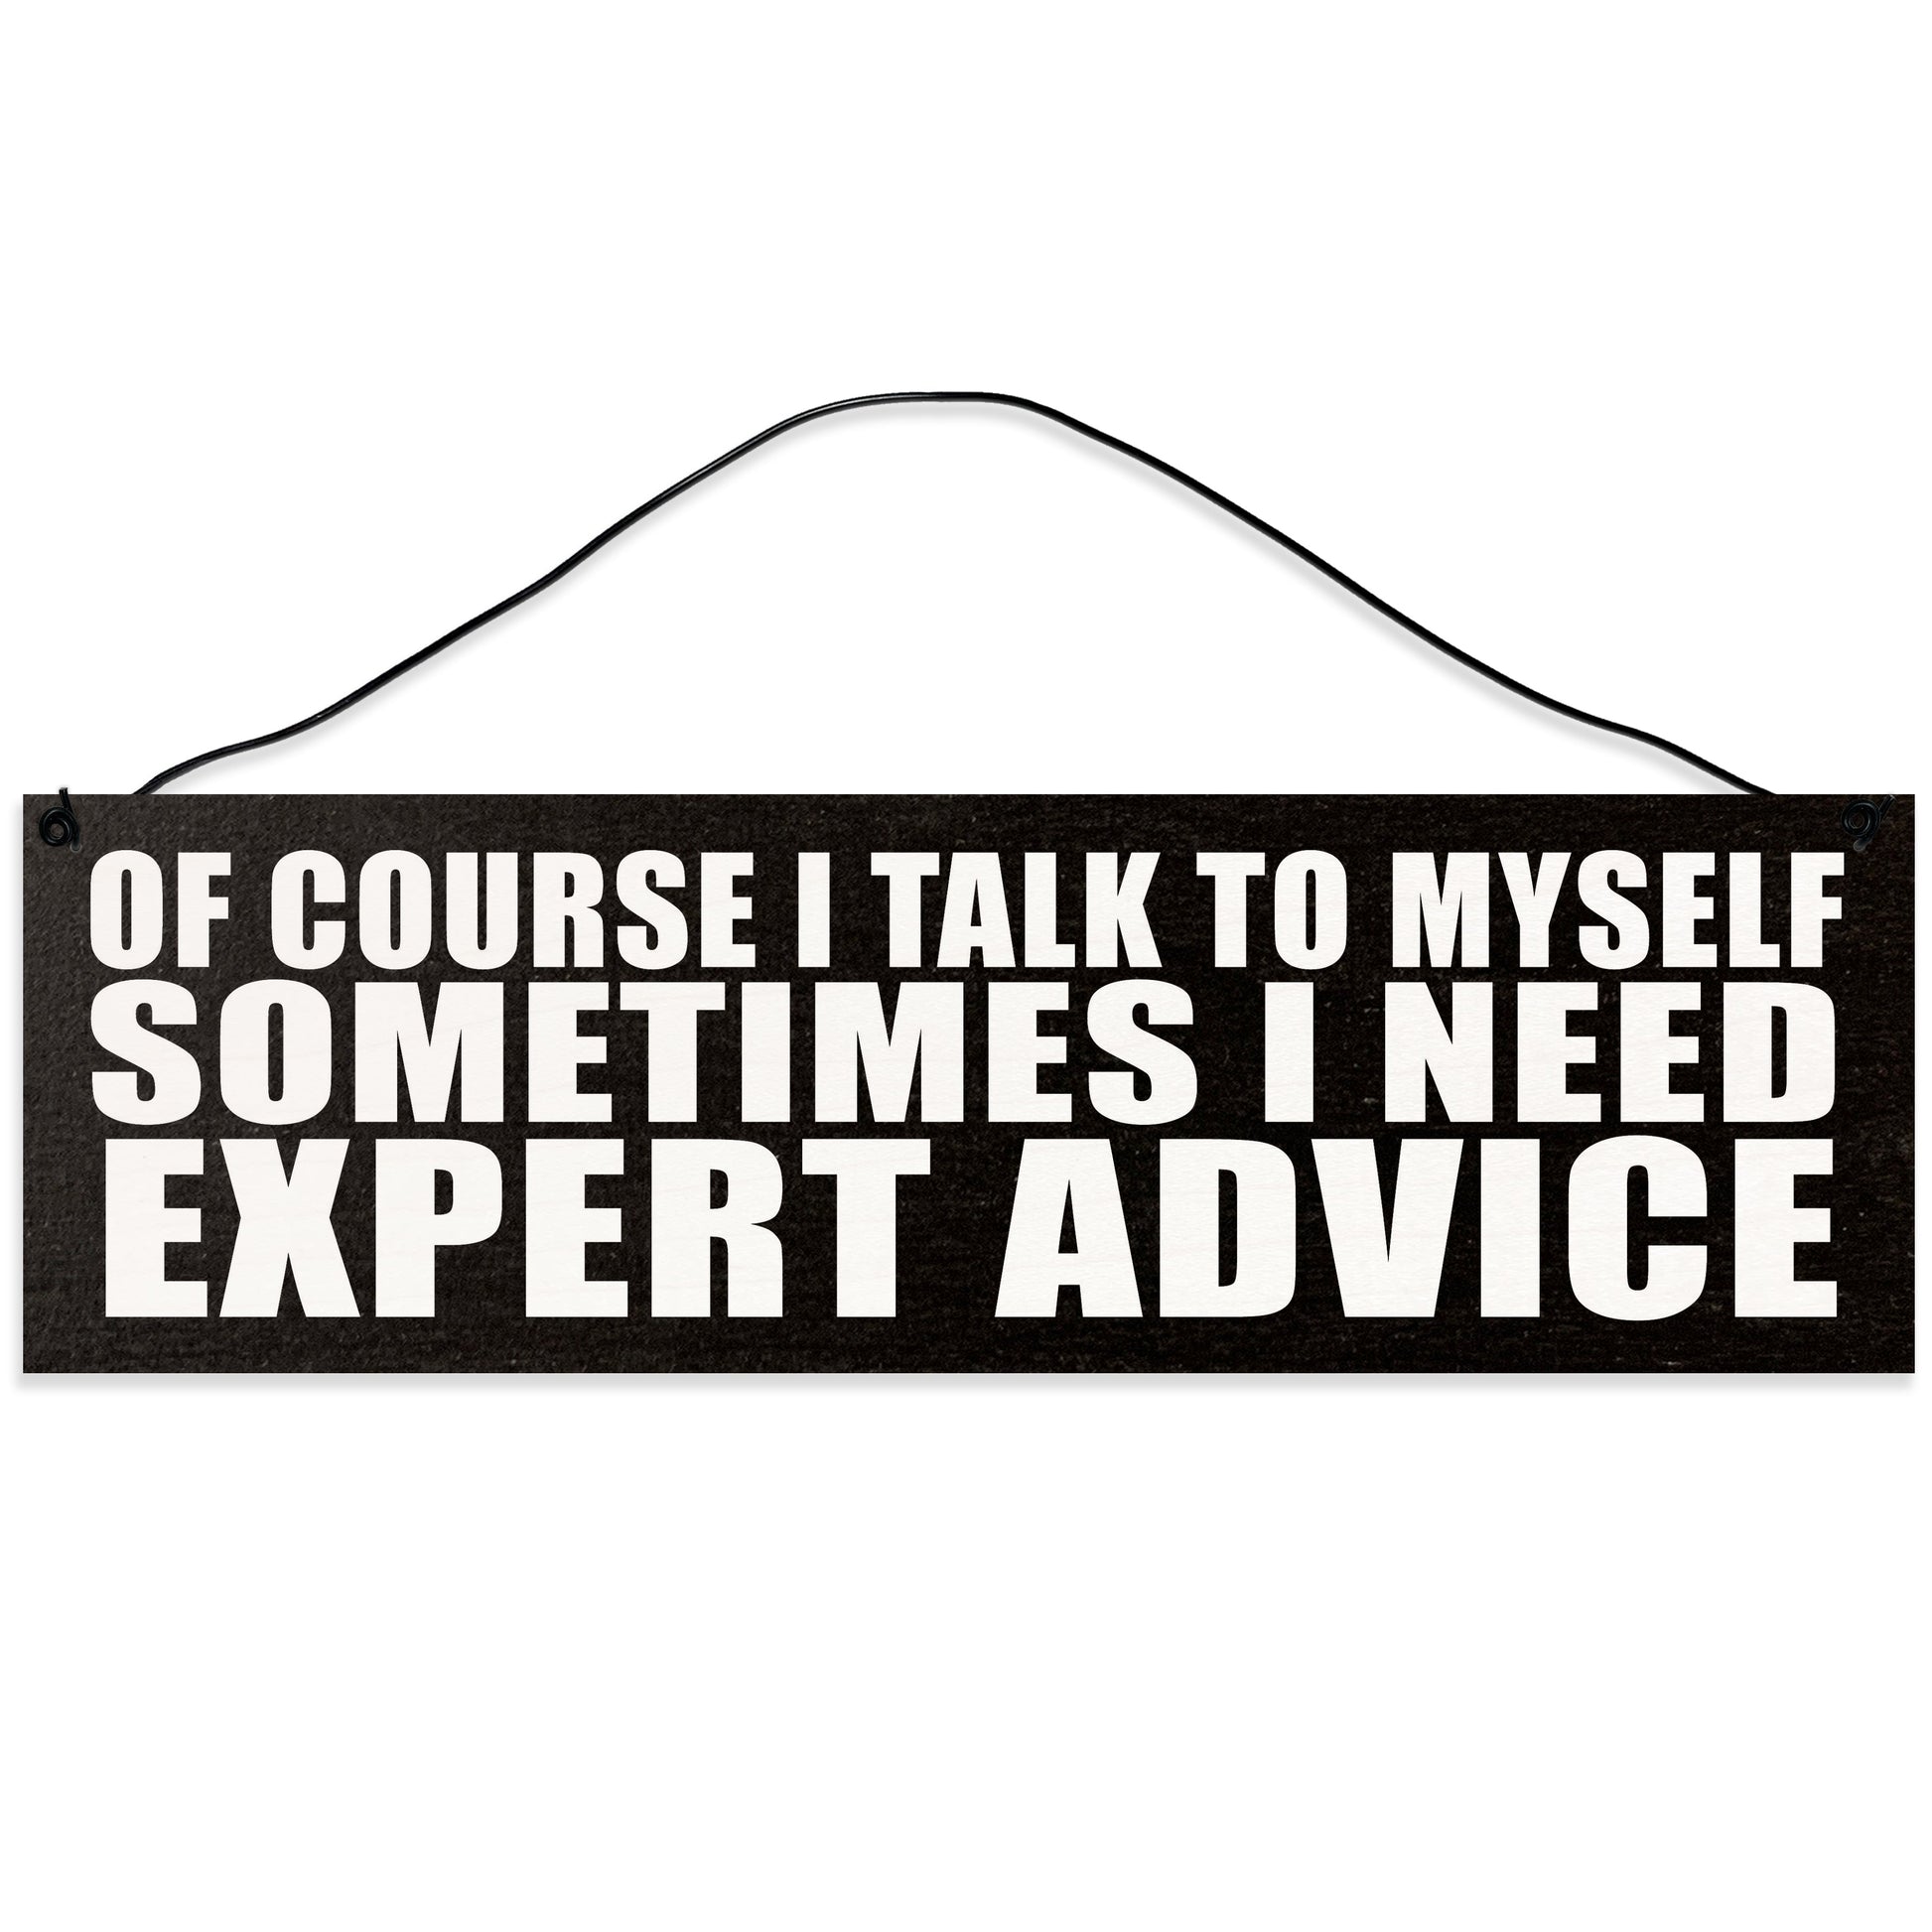 Sawyer's Mill - Of Course I Talk to Myself. Sometimes I Need Expert Advice. Wood Sign for Home or Office. Measures 3x10 inches.